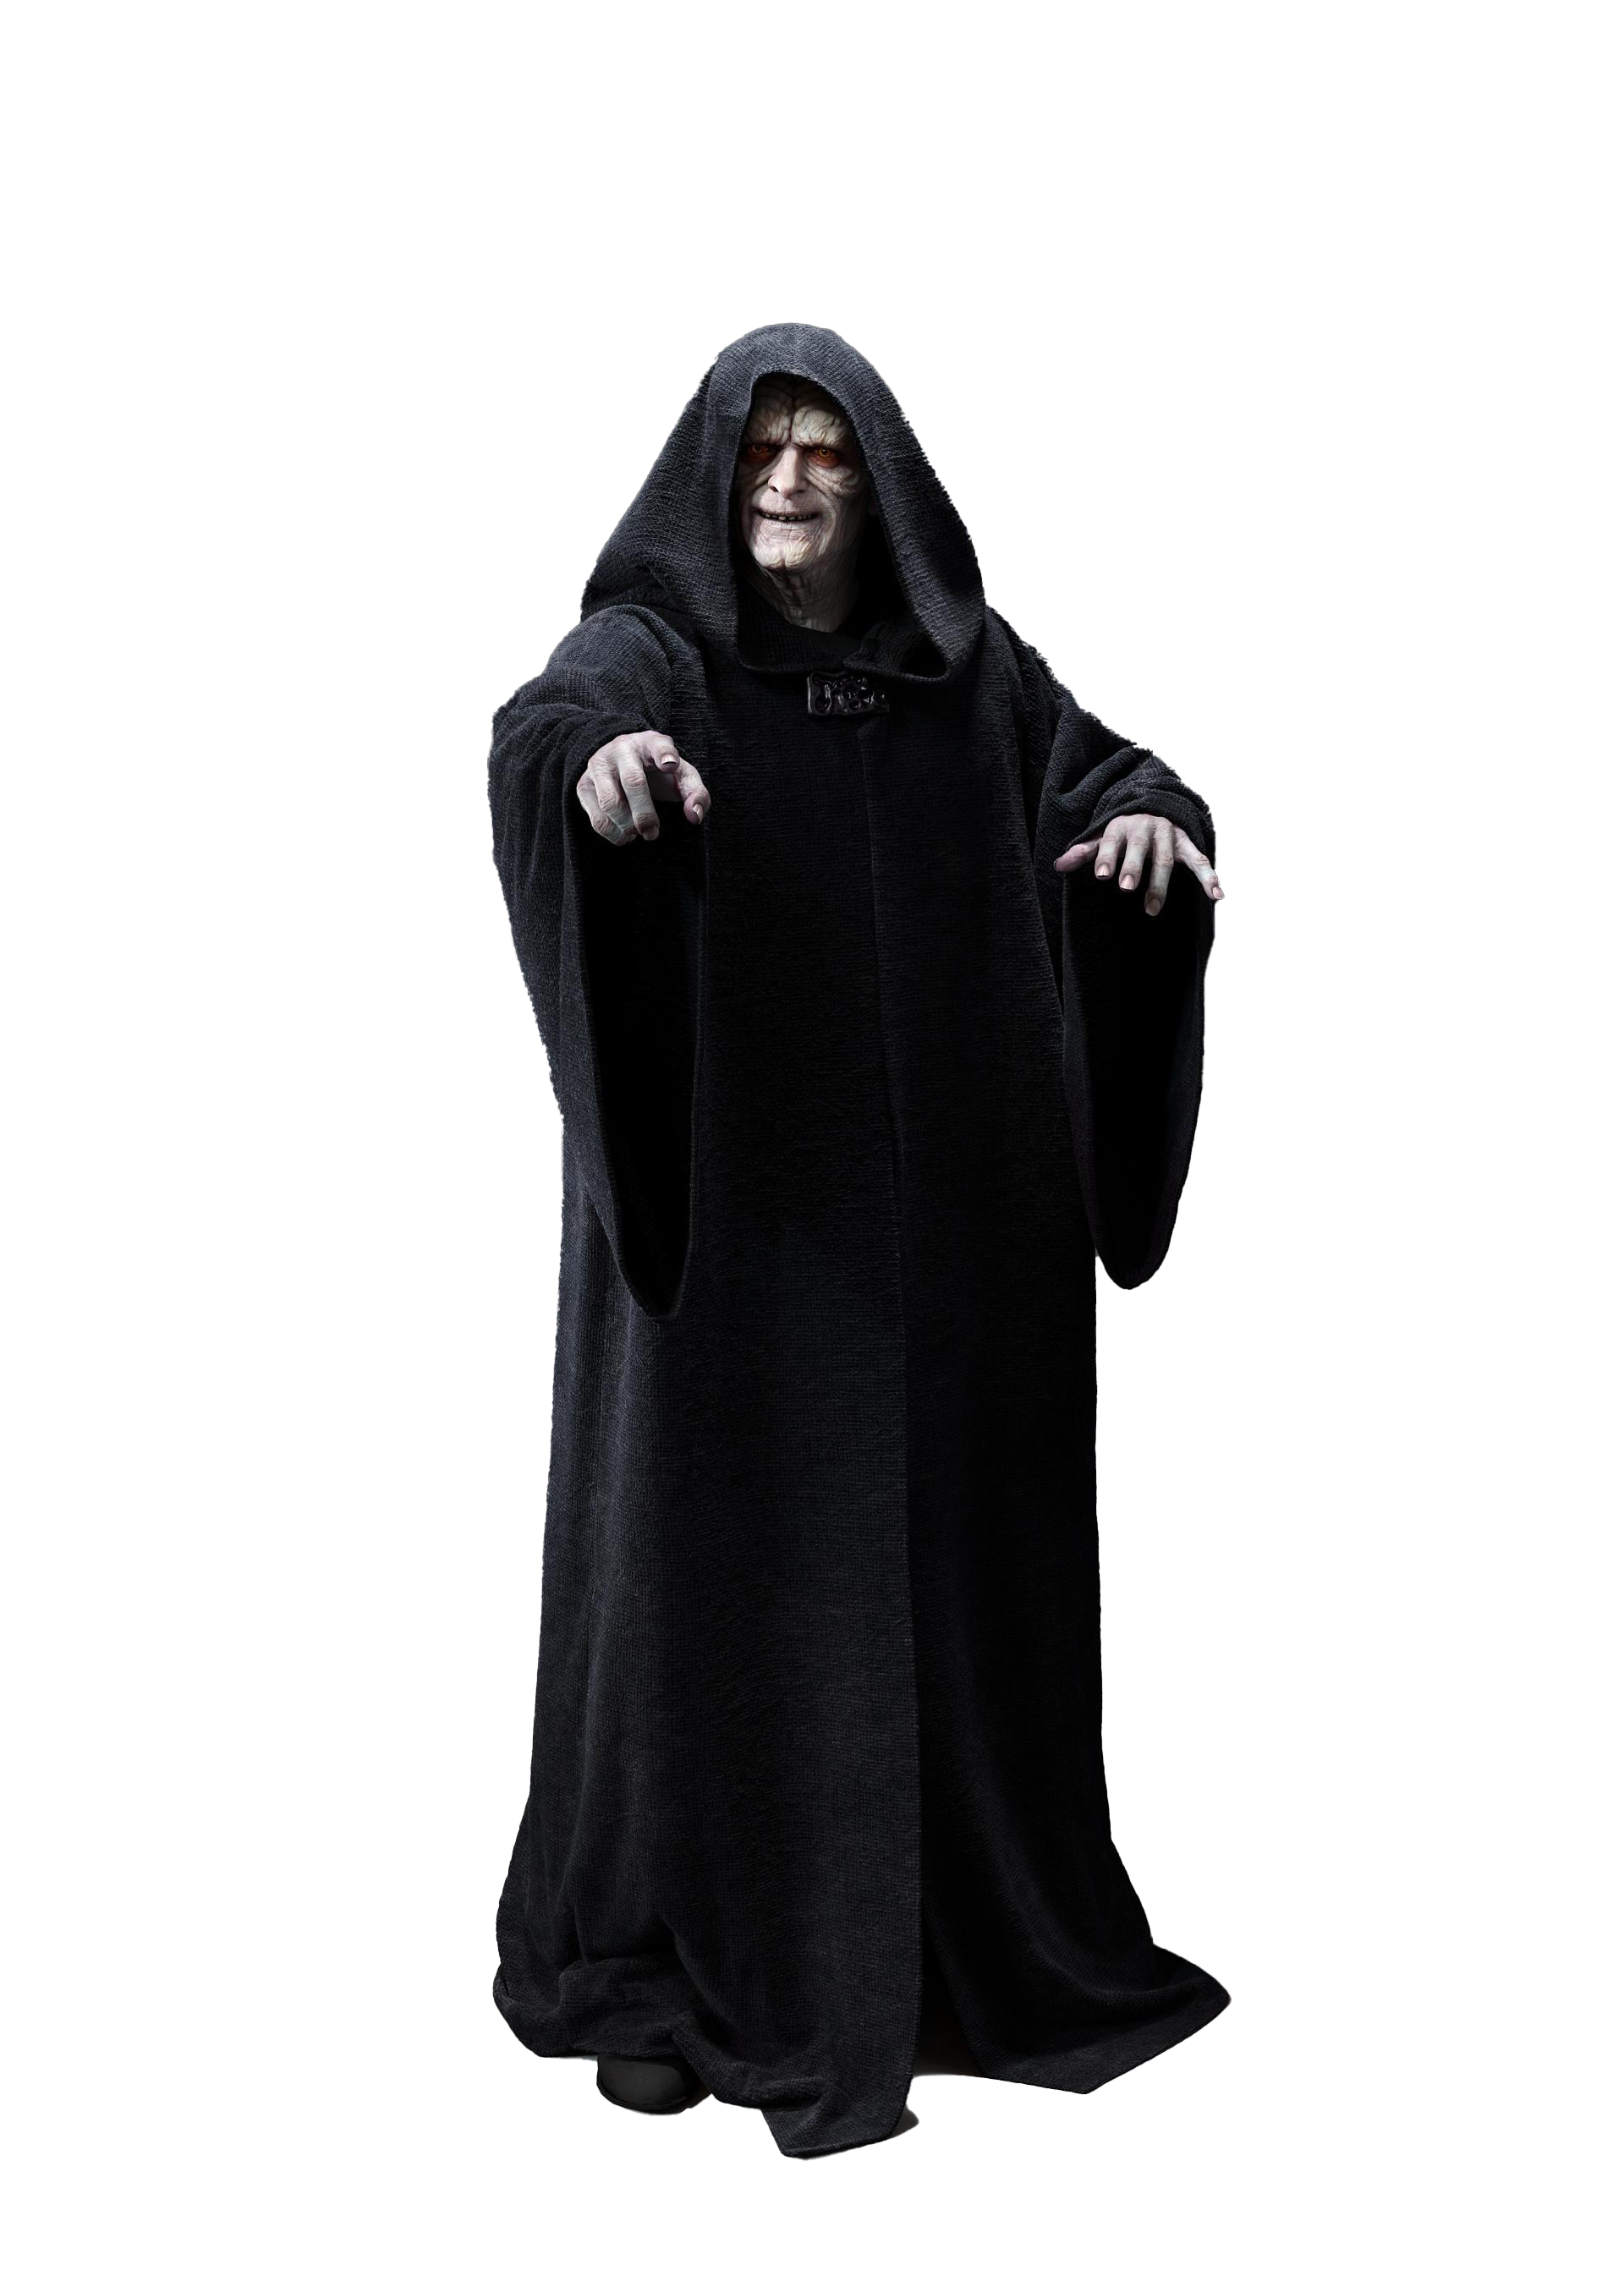 Palpatine Emperor Picture Free Download Image PNG Image